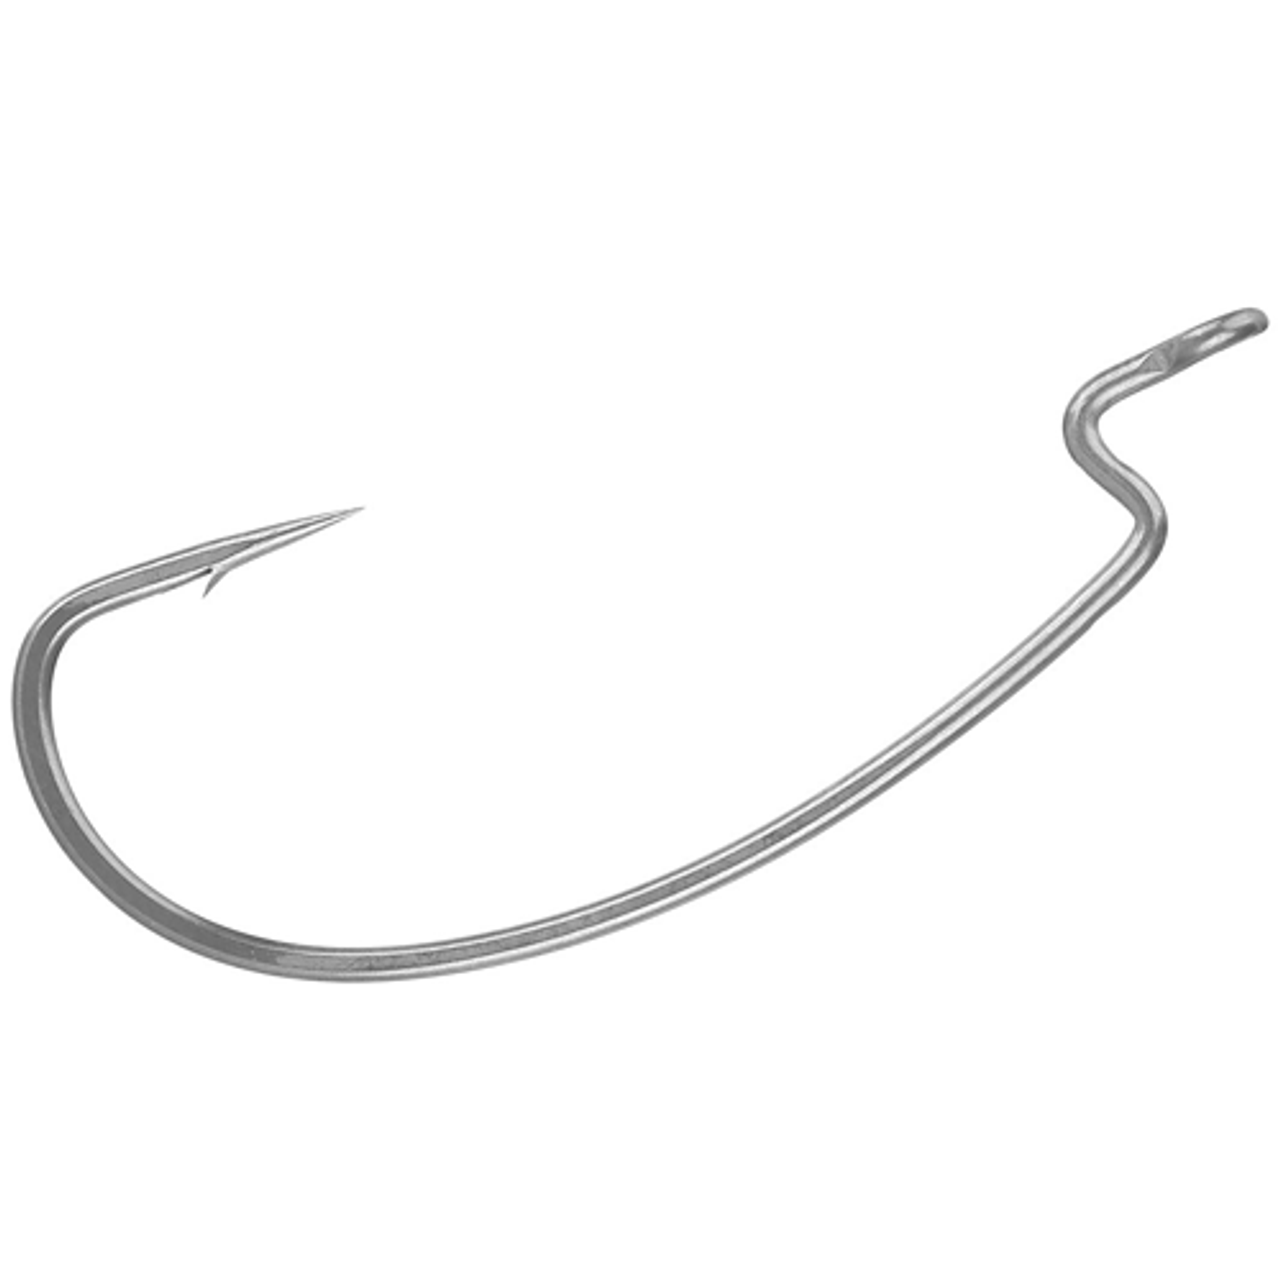 https://cdn11.bigcommerce.com/s-uv5can9due/images/stencil/1280x1280/products/18494/183130/Hayabusa-WRM959-Extra-Wide-Gap-Offset-Worm-Hook-Heavy-Wire__42528.1576240741.png?c=2